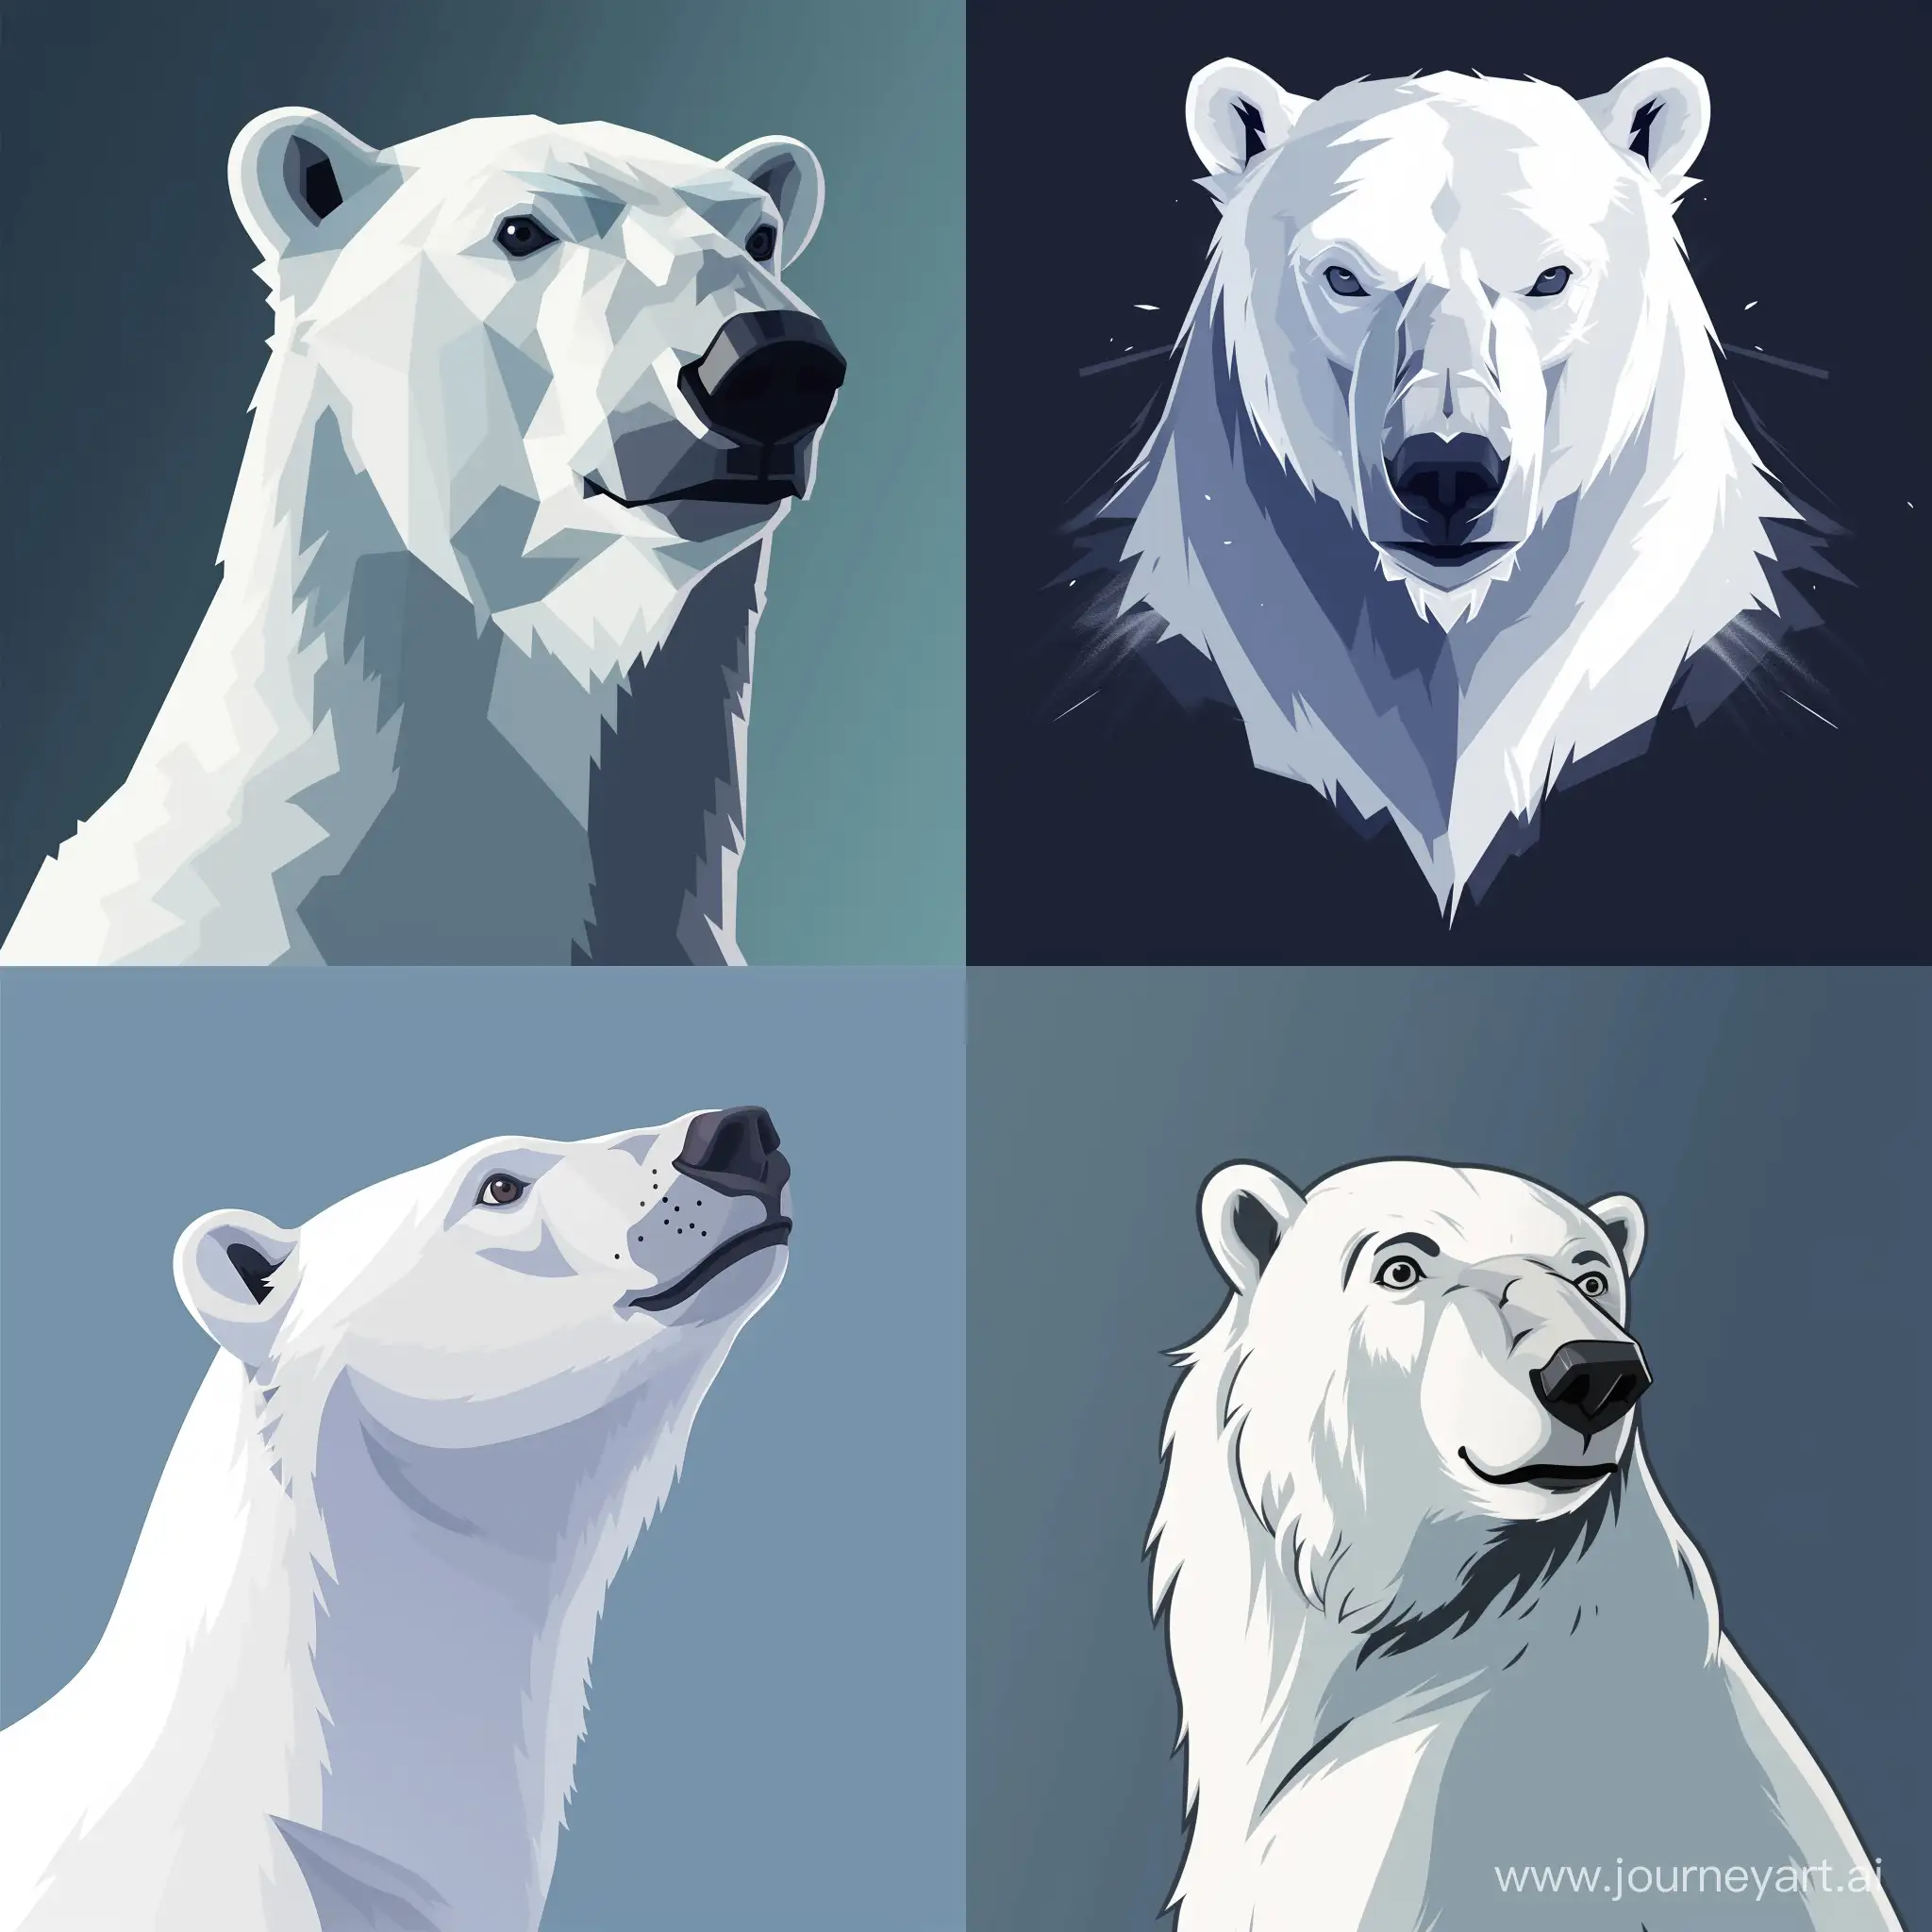 Create an avatar with an image of a polar bear that looks mighty and impressive, yet simple and stylish. I want it to be memorable and easily recognizable even at small sizes